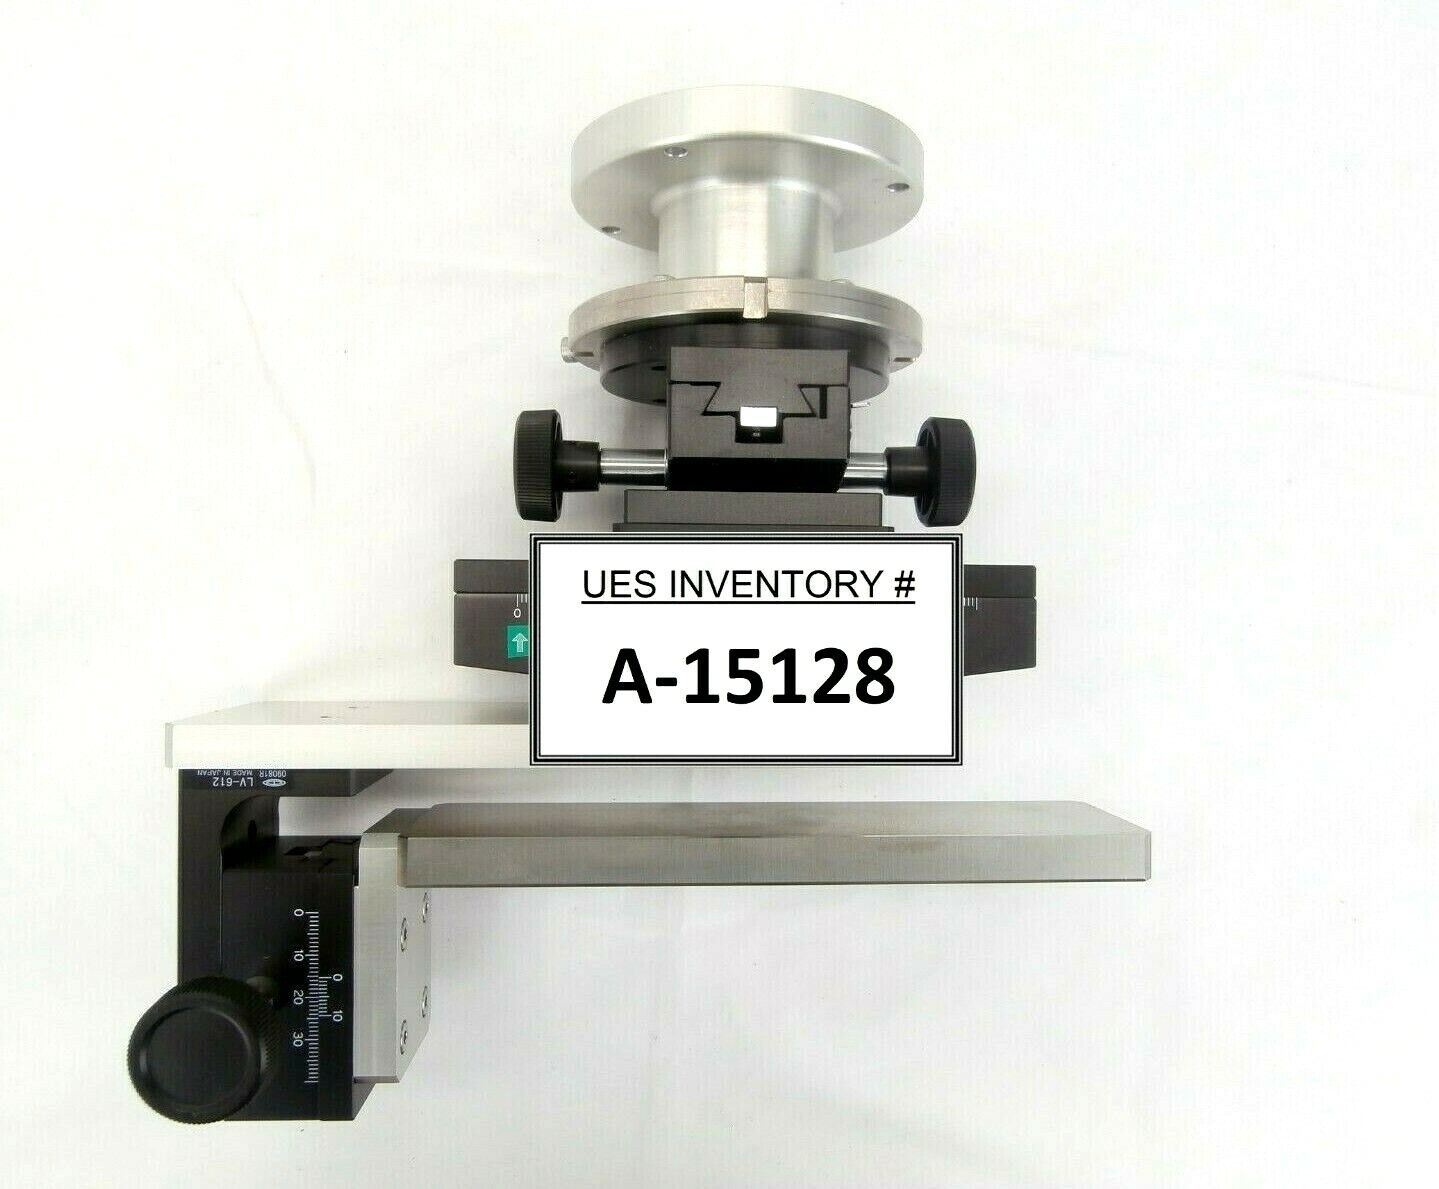 Chuo Precision Industrial X-Axis Manual Stage Assembly LS-112W LS-912W LV-612